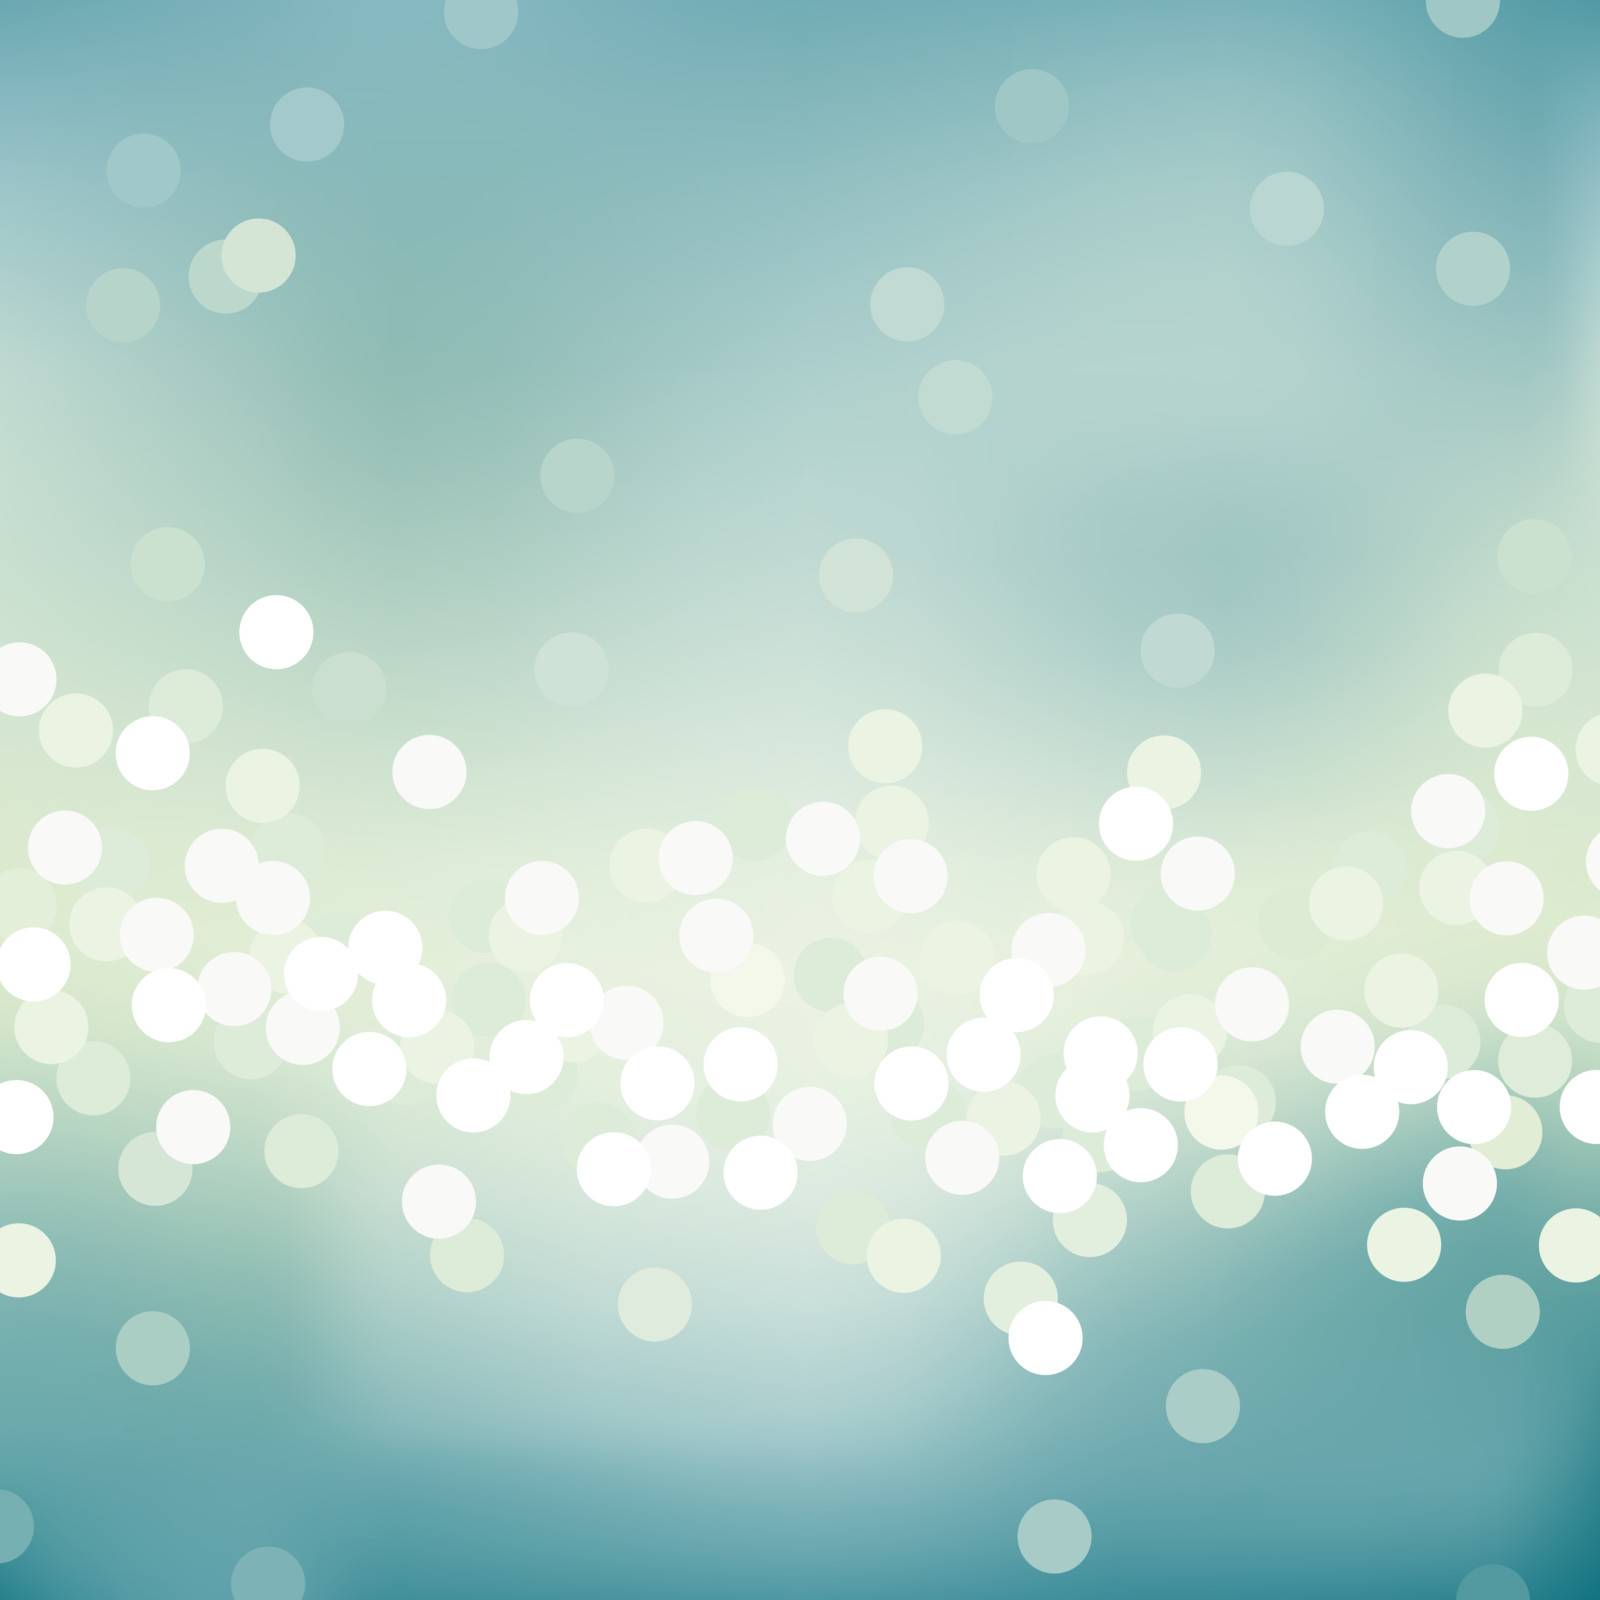 Abstract editable vector background of light dots